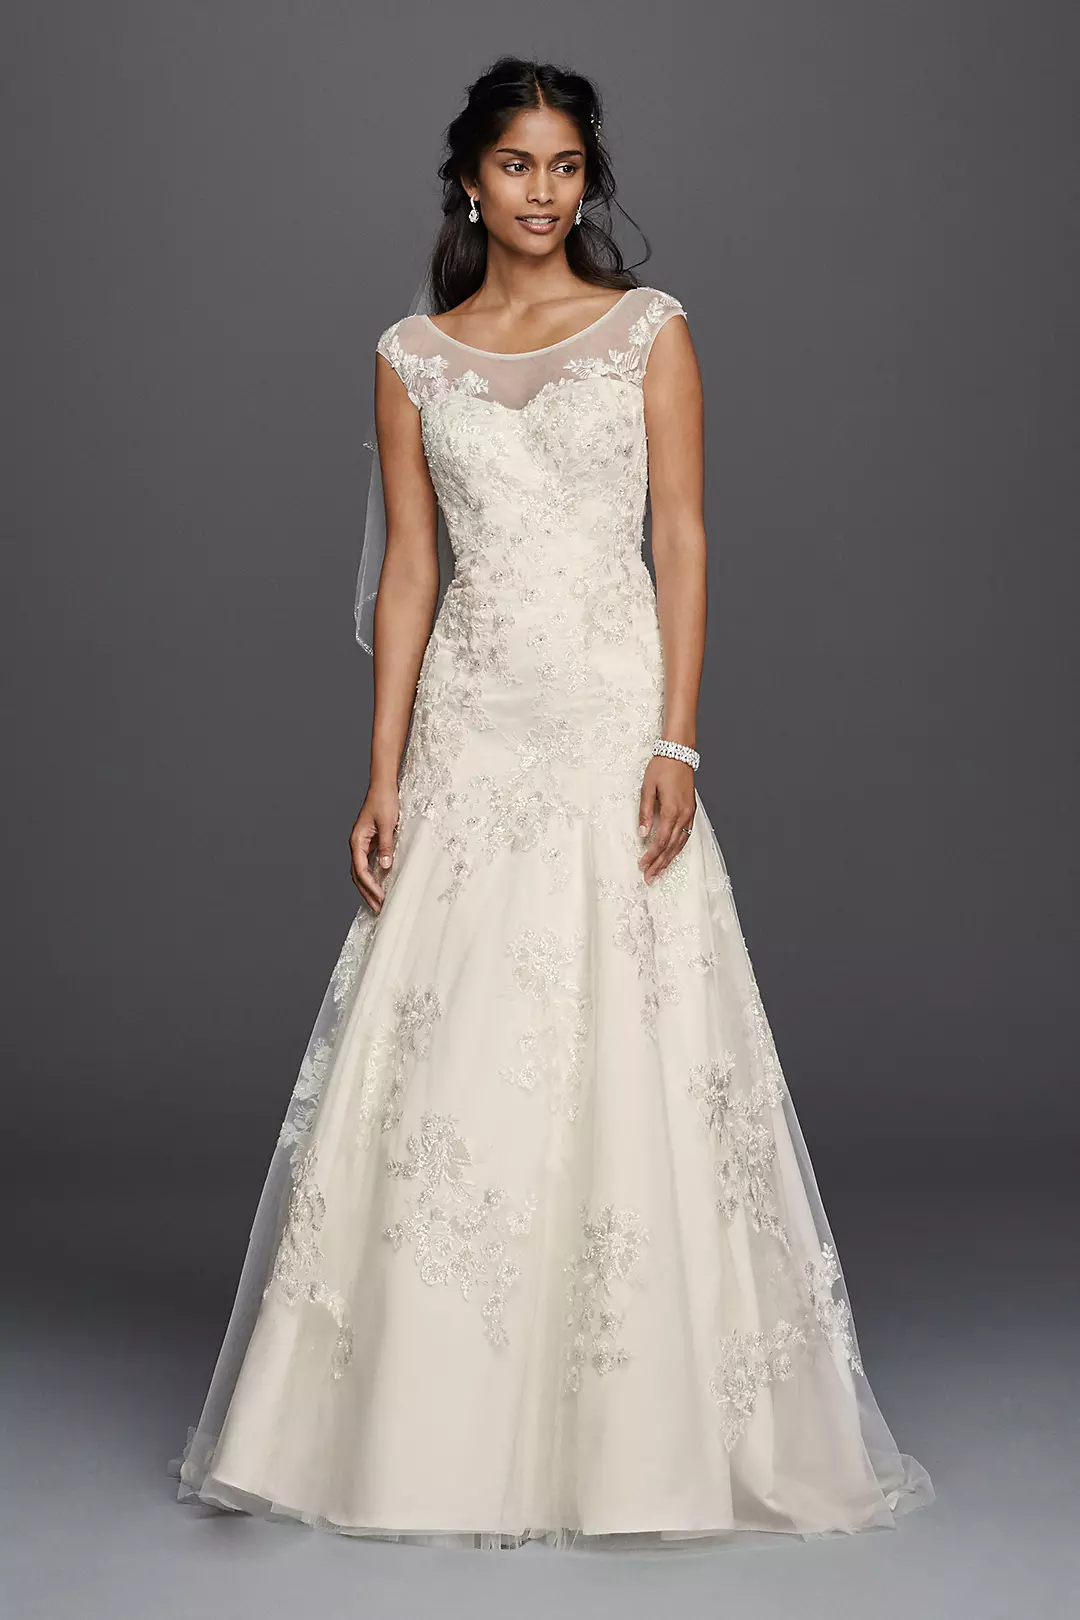 As-Is Tulle Aline Wedding Dress with Lace Applique Image